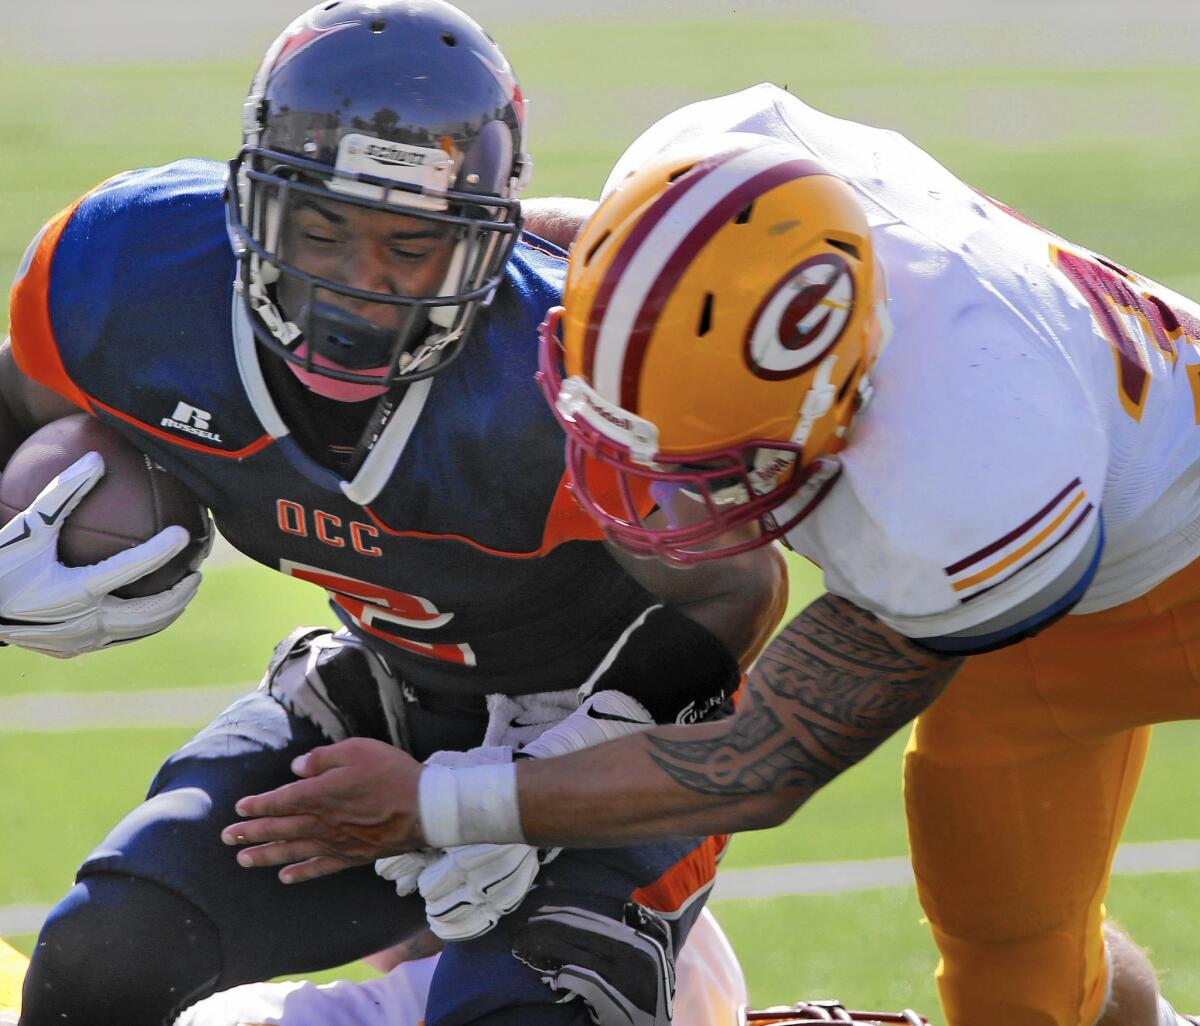 A player from Saddleback College makes a tackle.